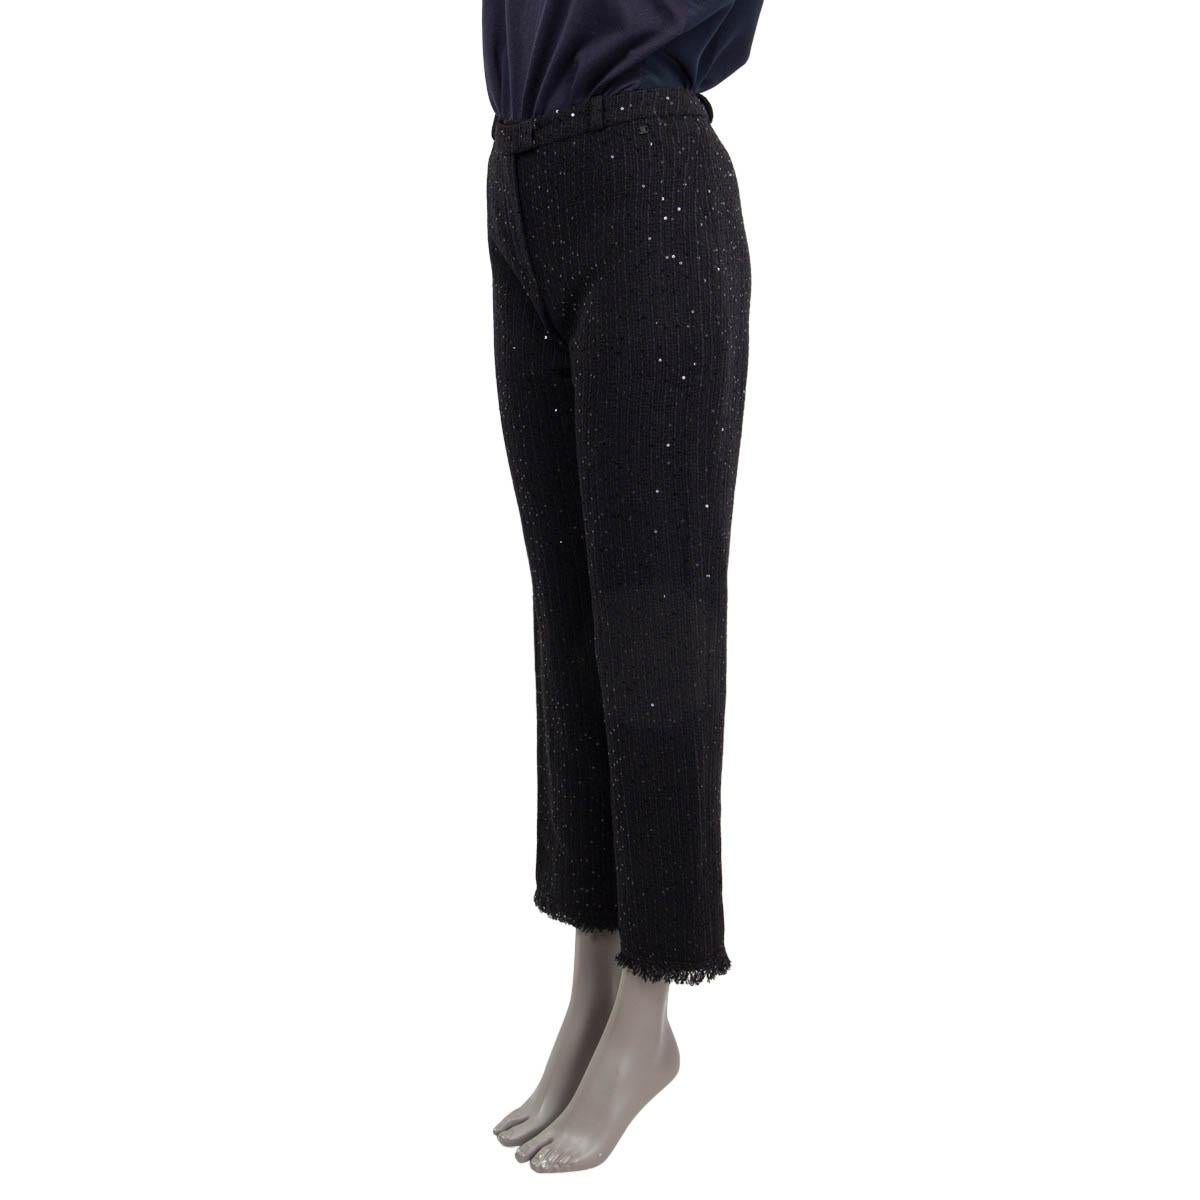 100% authentic Chanel straight tweed pants in black nylon (54%), wool (24%) and polyester (22%). Features all over the pants sequin embellished and fringe bottom hem. Closes with a concealed zipper and one hook on the front. Lined in black silk